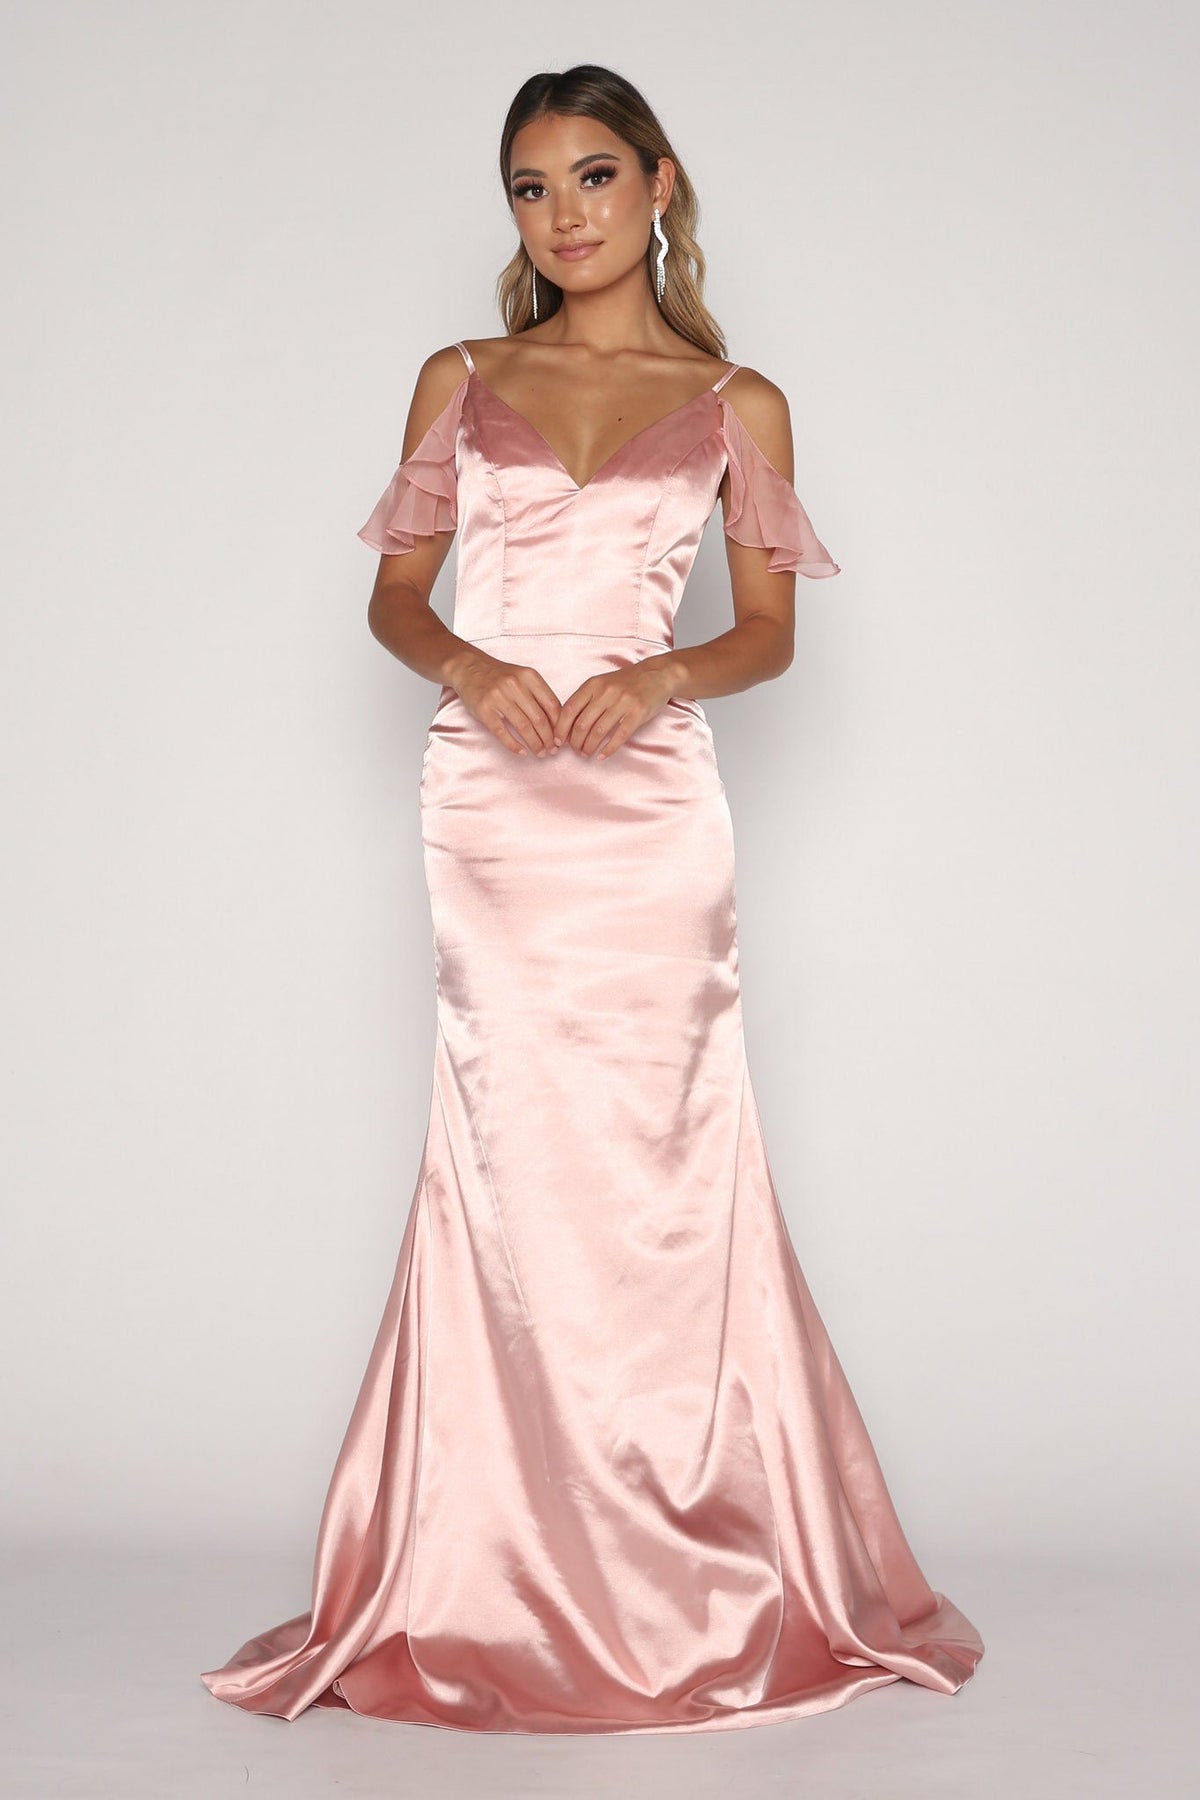 Light Pink Satin Floor Length Maxi Dress with V-neckline, Cascading Ruffle Sleeve Detail, Thin Shoulder Straps, Open Back and Fit and Flare Silhouette